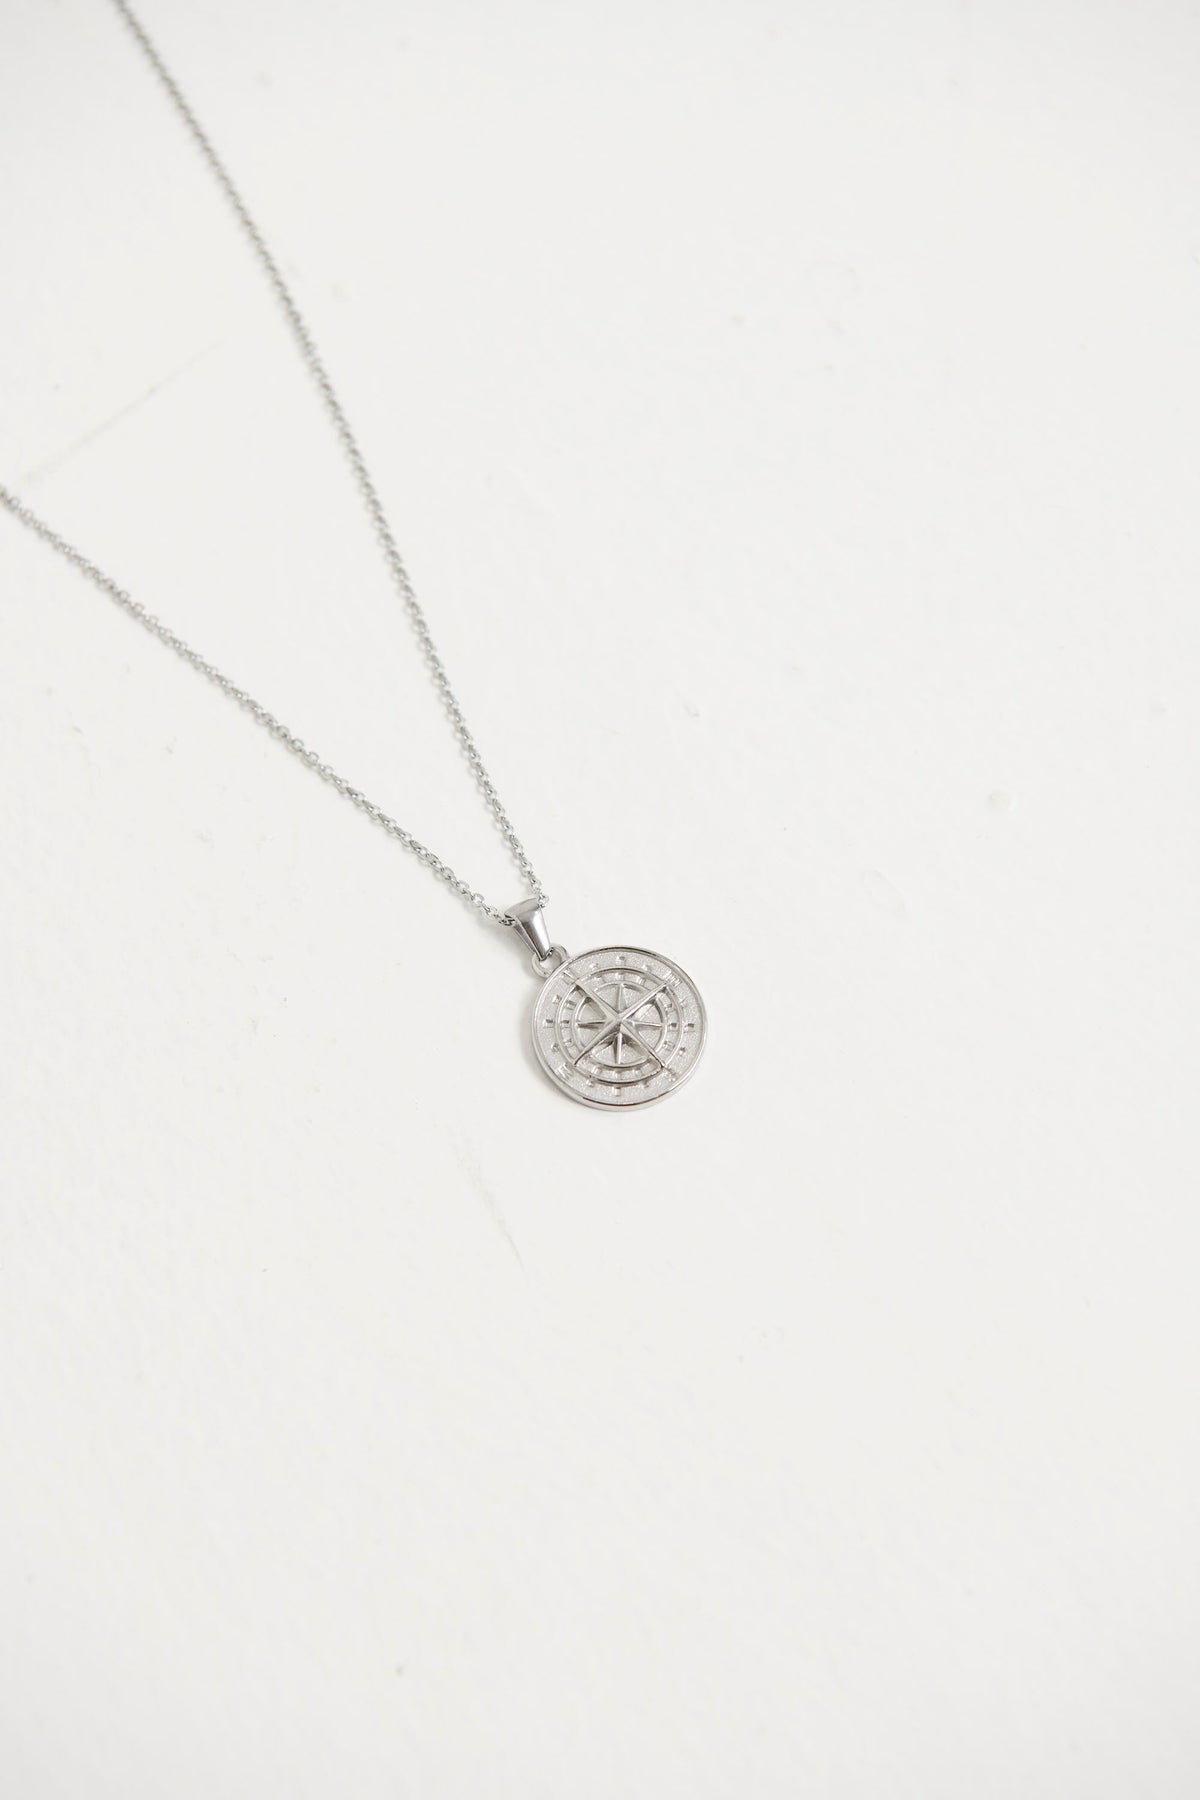 NTH Compass Necklace Silver